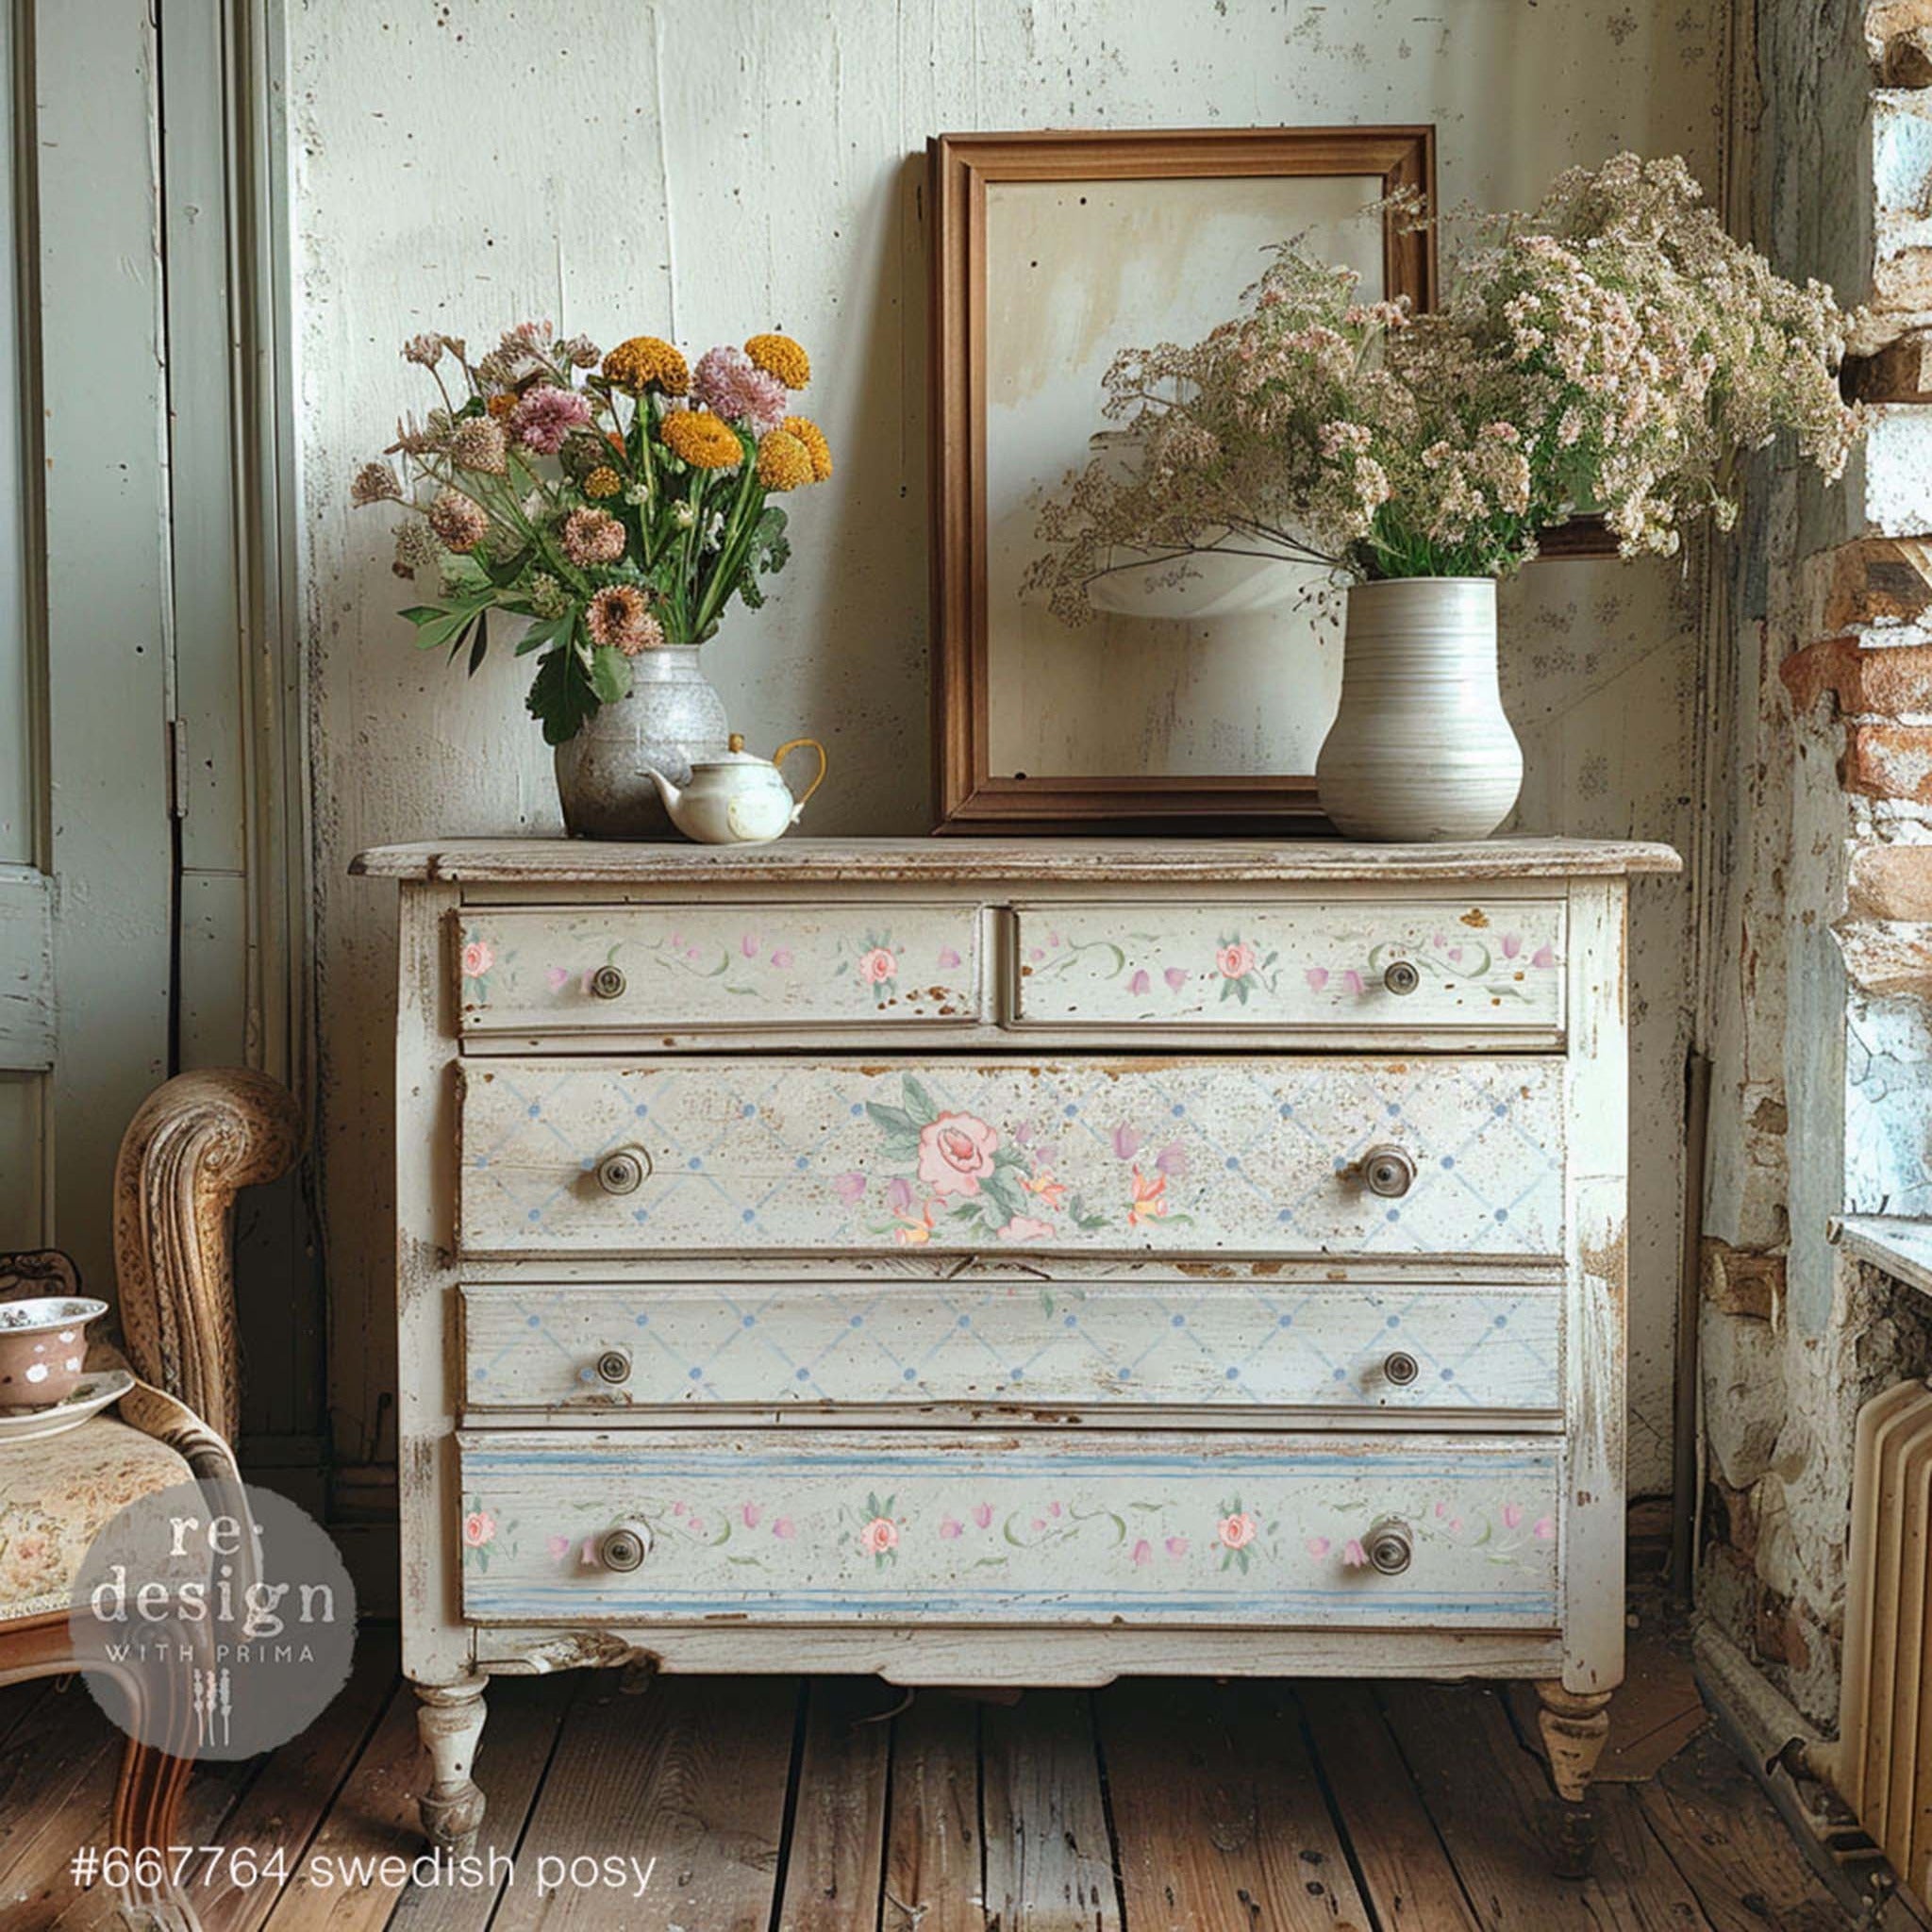 A vintage 5-drawer dresser is painted in white wash and features ReDesign with Prima's Swedish Posy Transfer by Annie Sloan on its drawers.